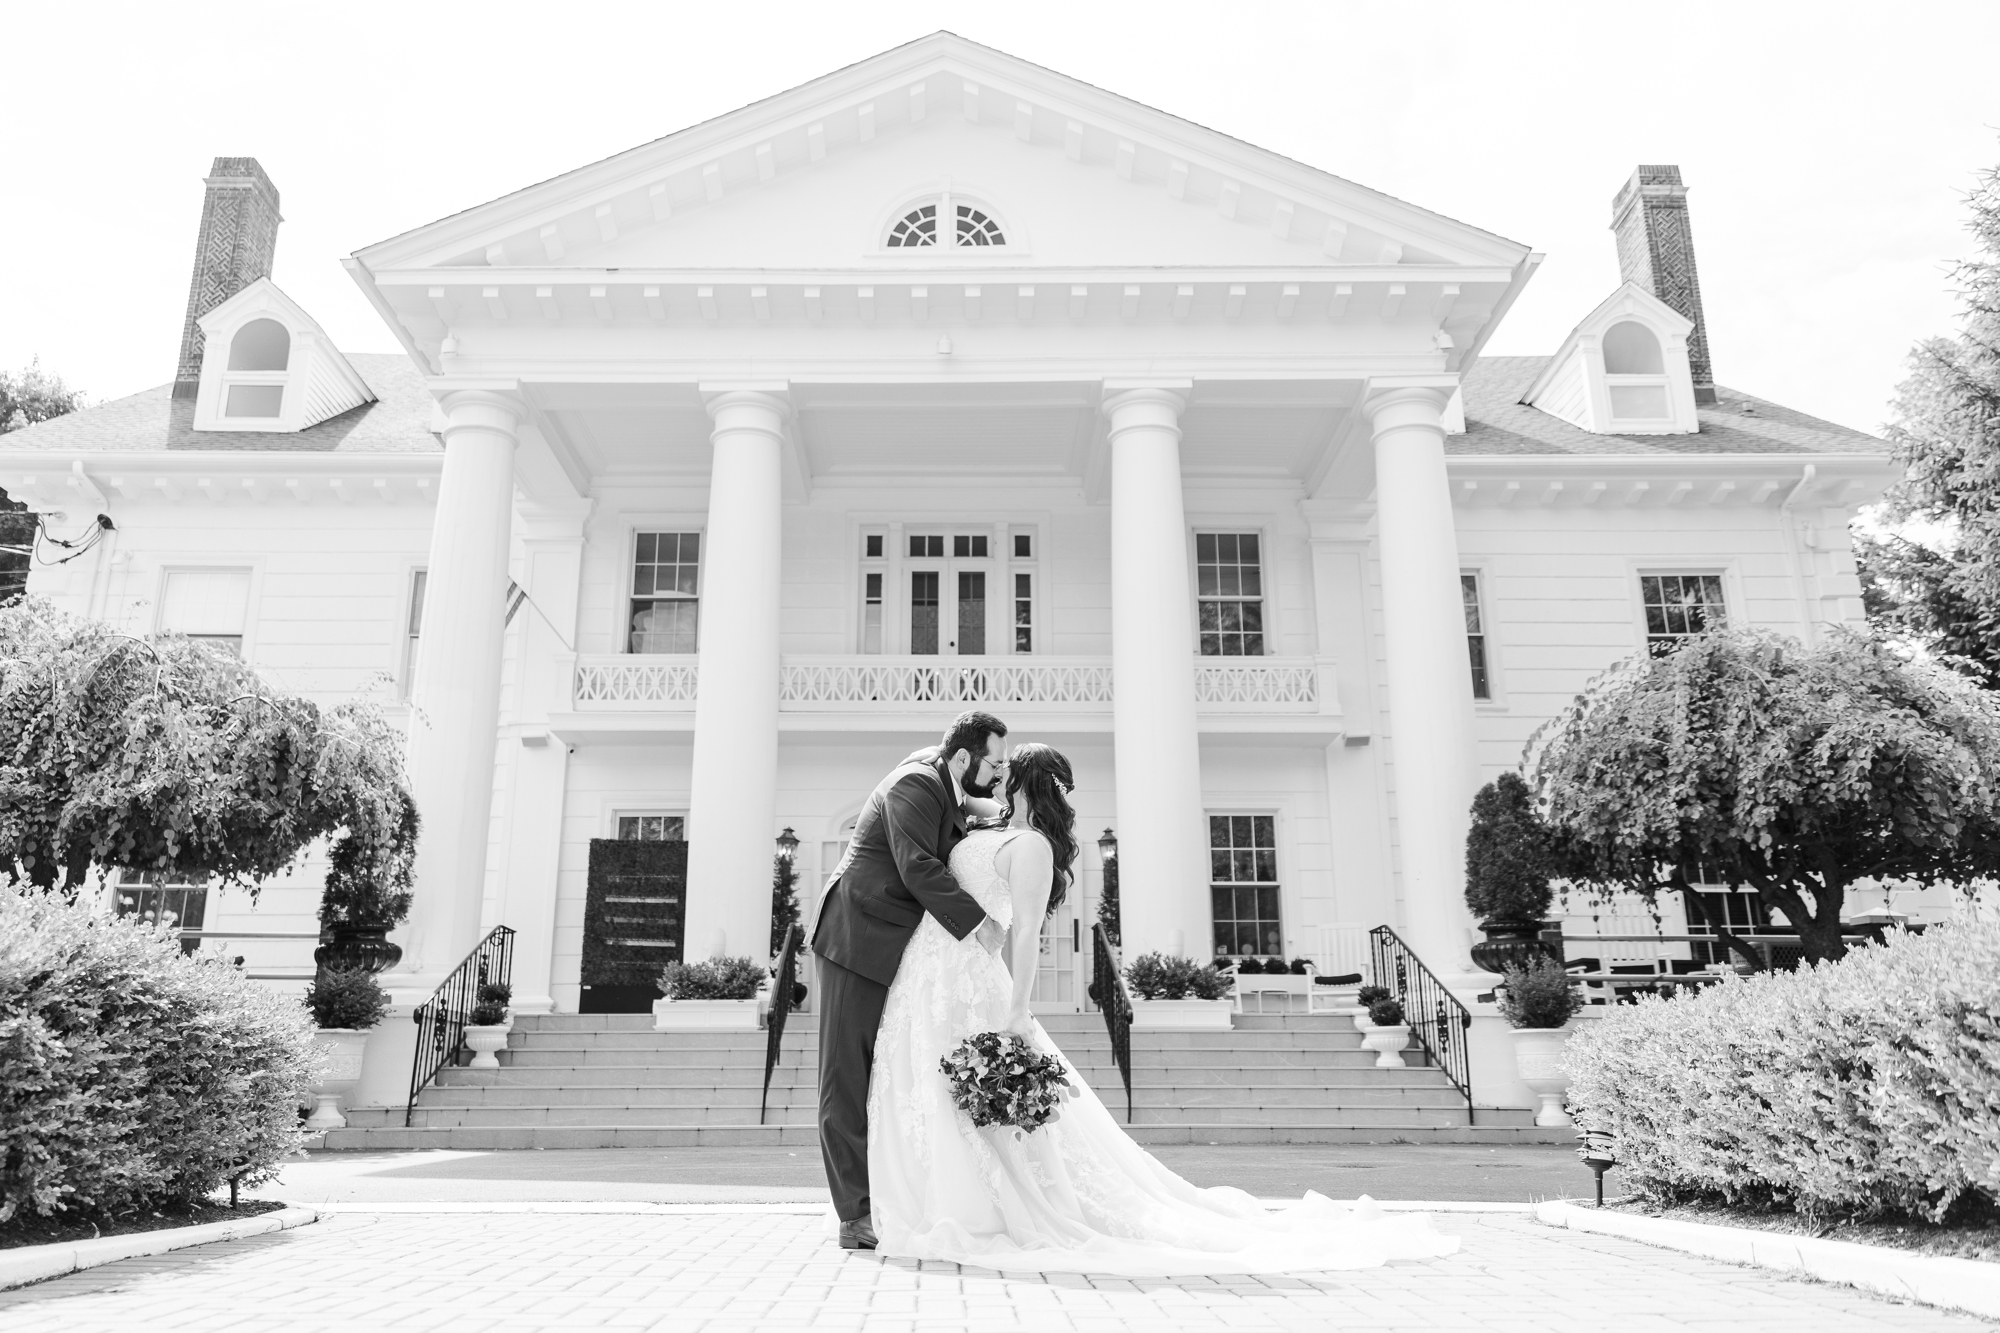 Romantic Wedding at Briarcliff Manor in New York